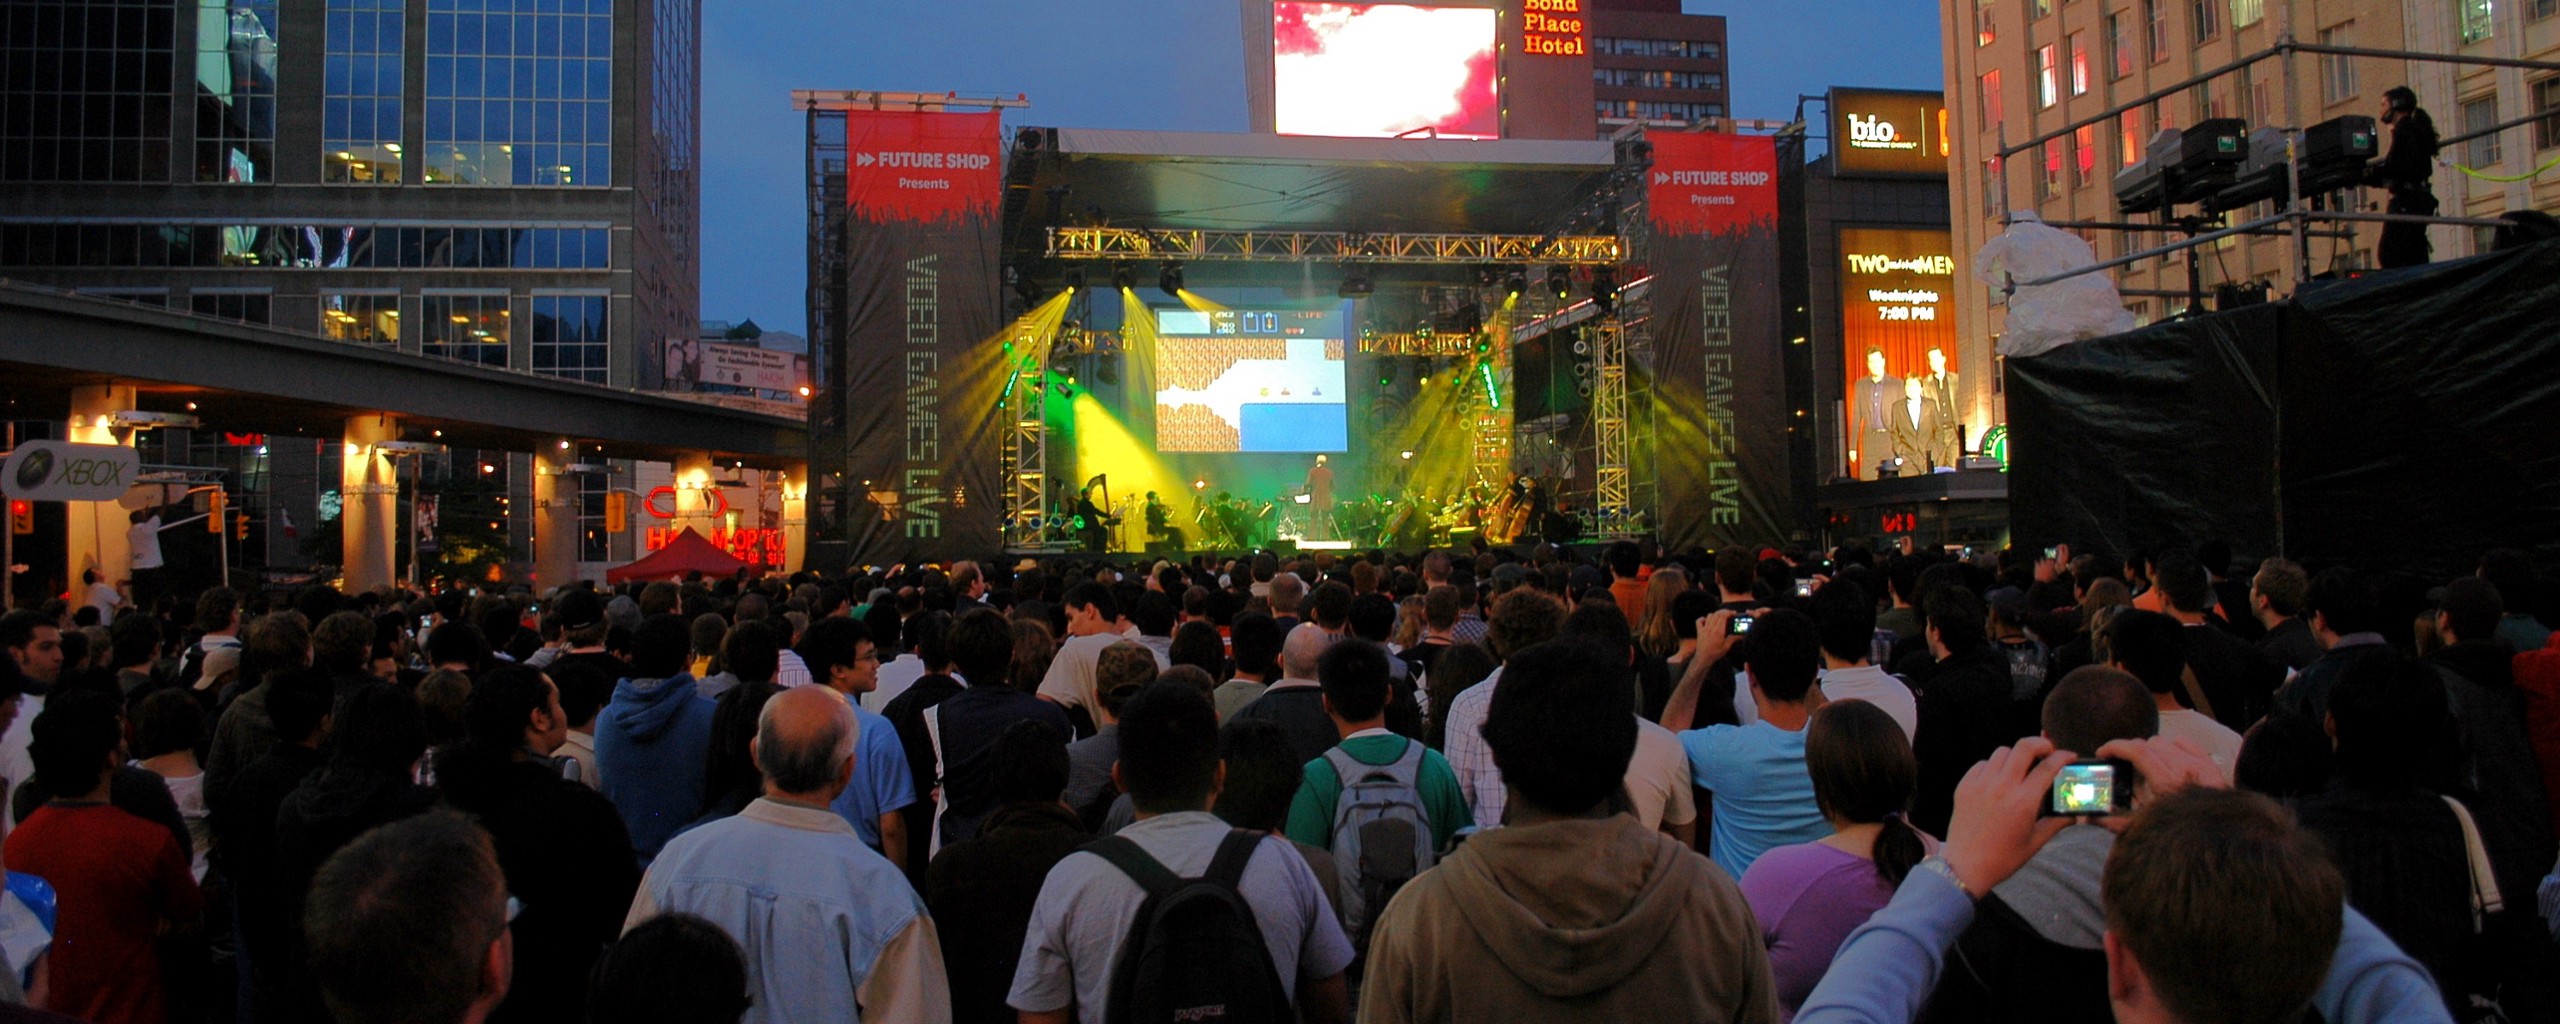 A crowd of people in an outdoor city square watch an orchestra perform on a stage, in front of a projection of a level from The Legend of Zelda.